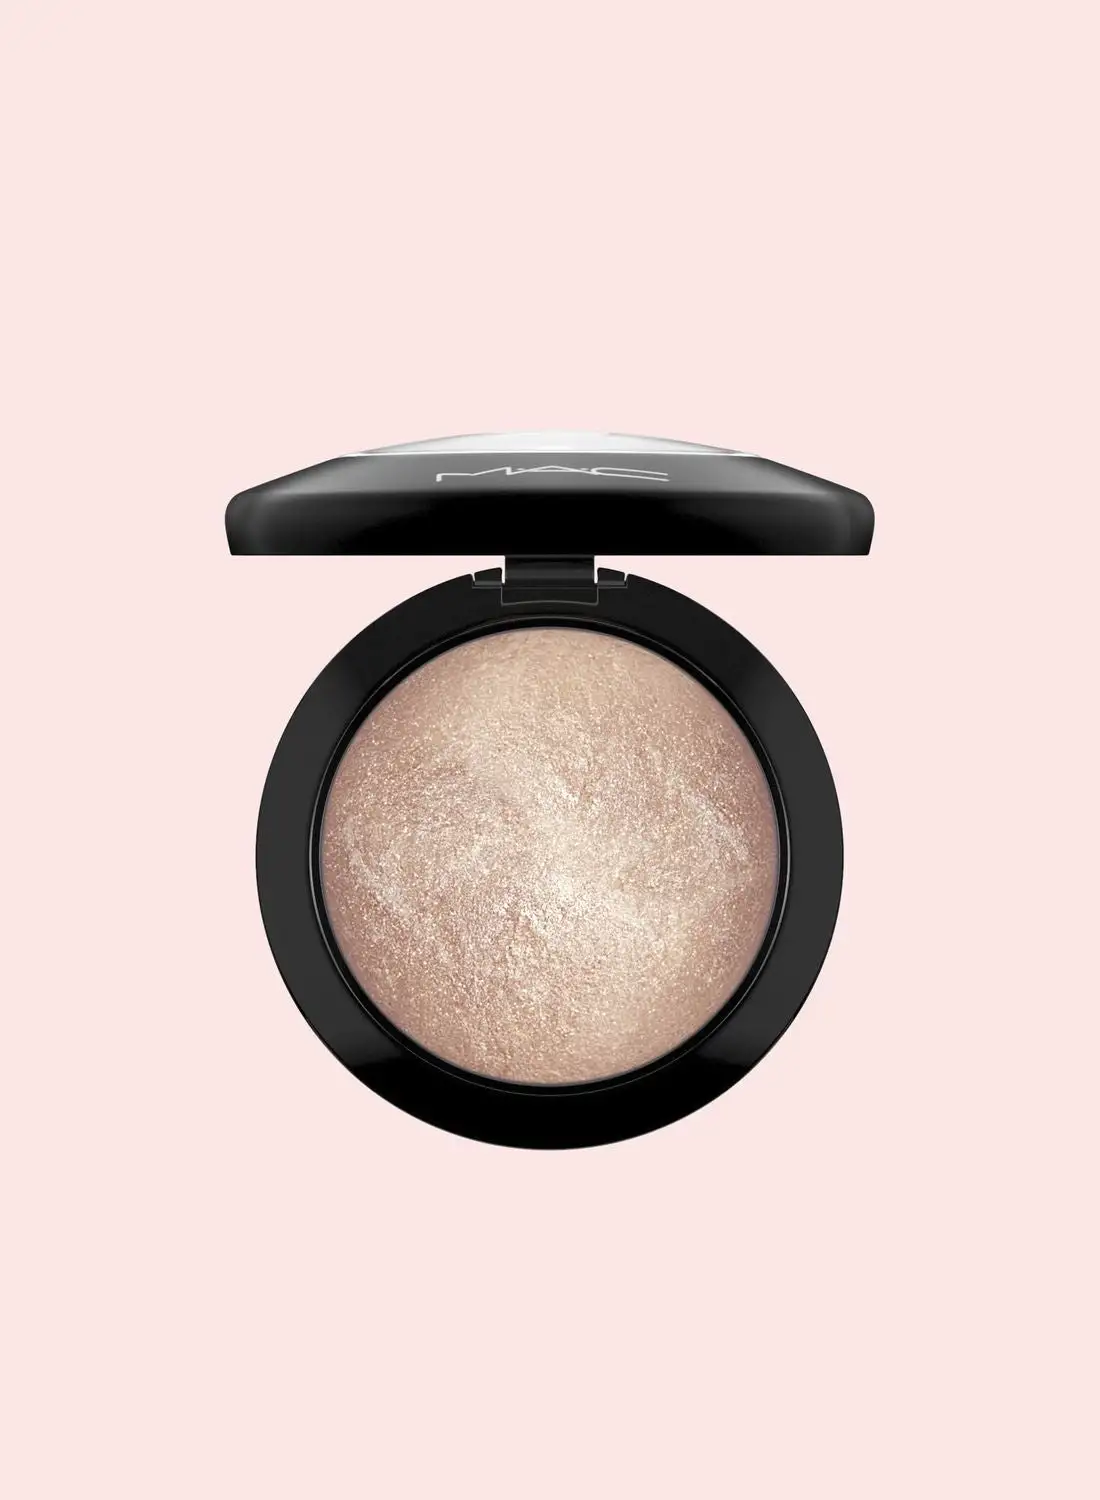 MAC Cosmetics Mineralize Skinfinish Highlighter - Soft & Gentle